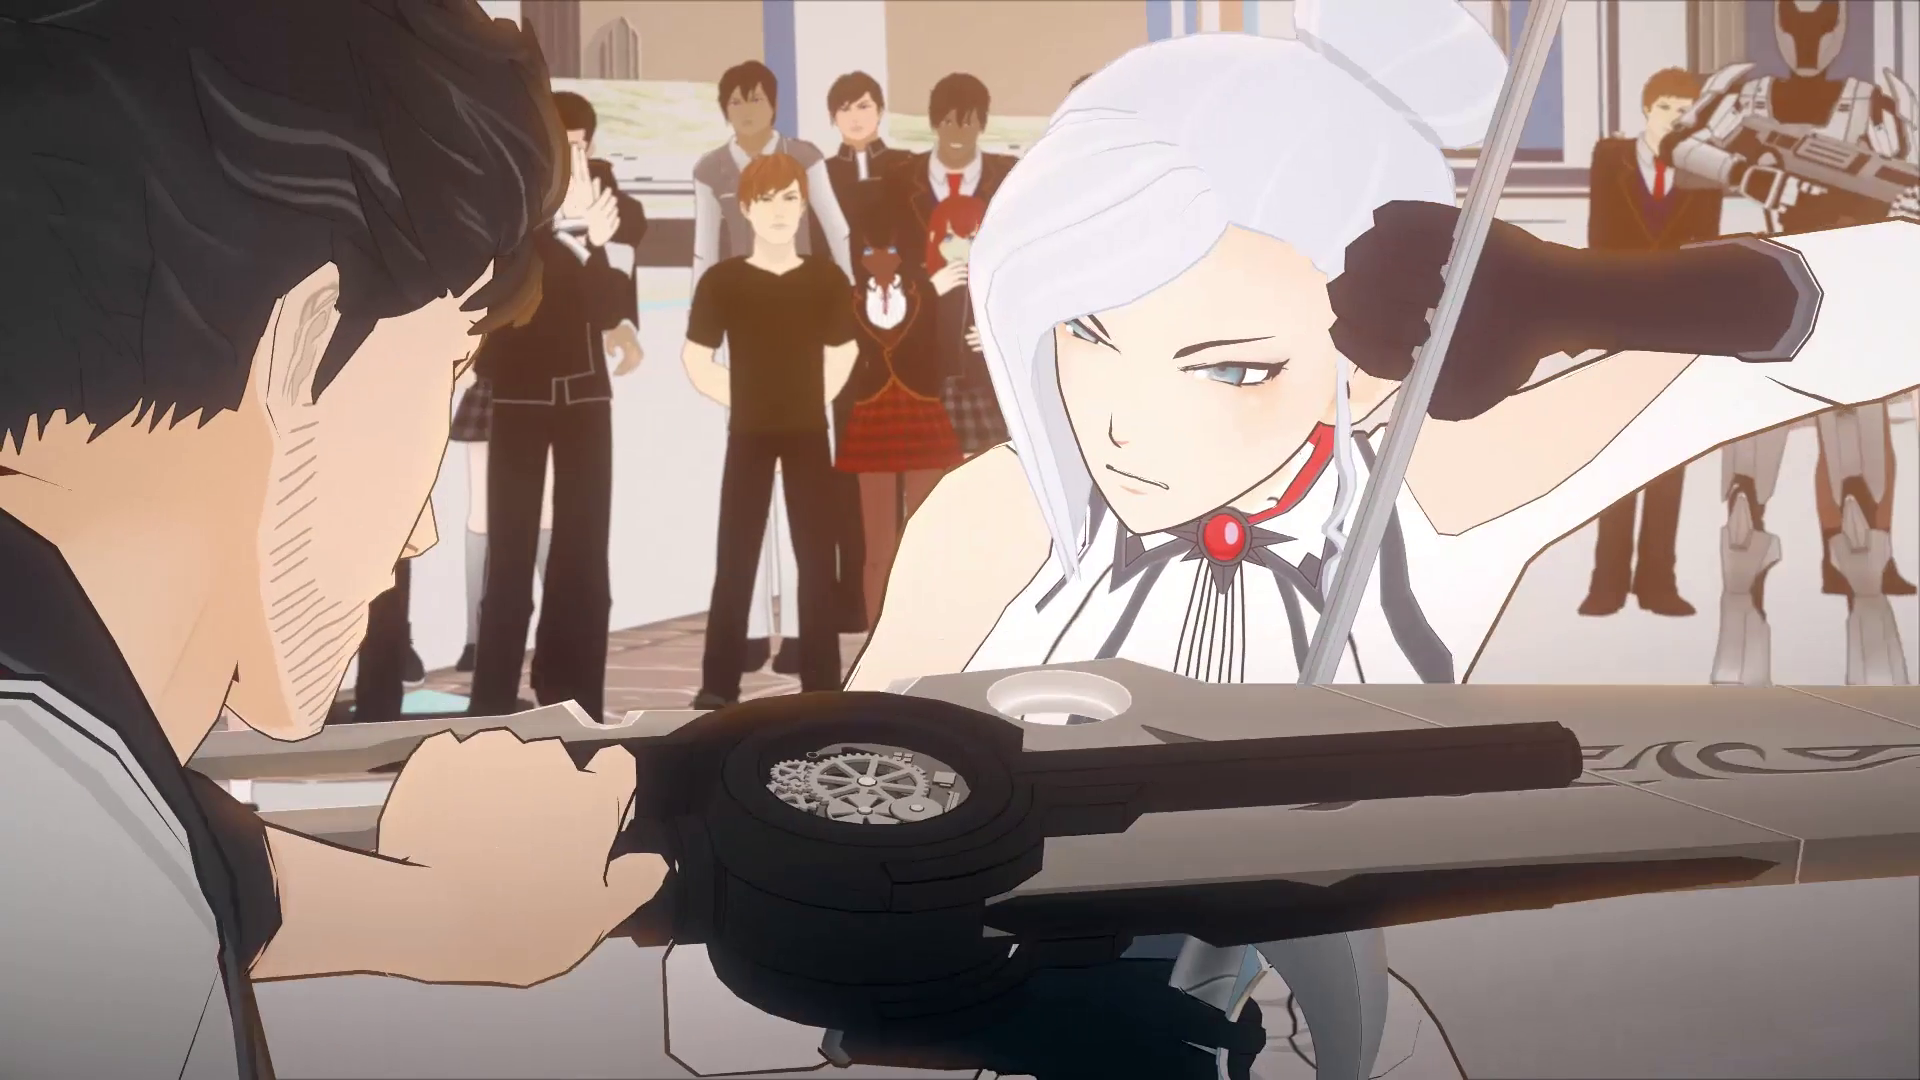 Background  Rwby, Rage quit, Social disorders